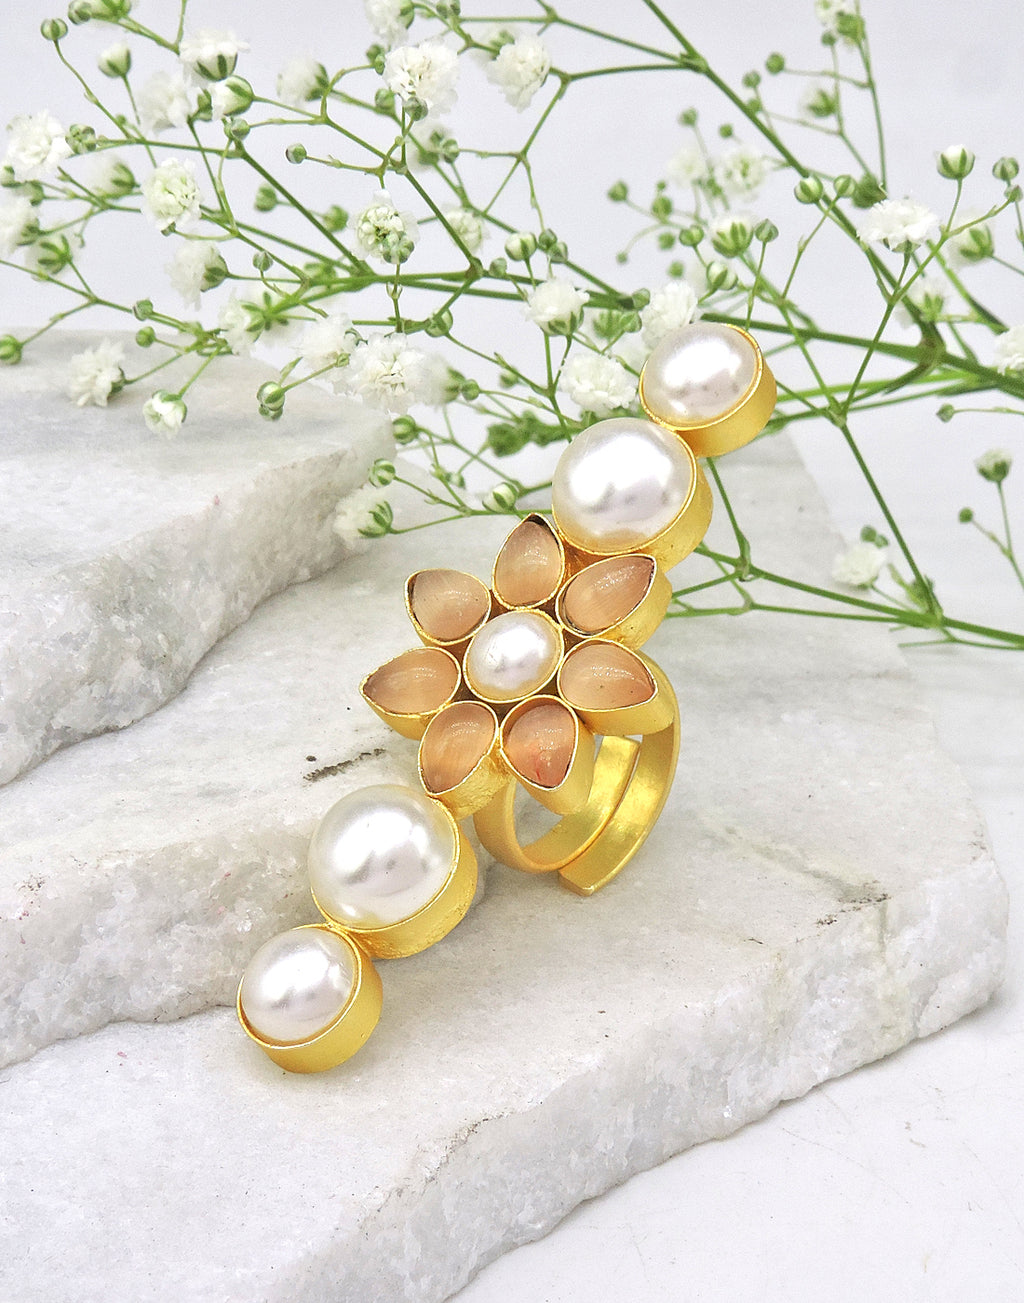 Floral Jewel Ring | Peach & Pink - Statement Rings - Gold-Plated & Hypoallergenic Jewellery - Made in India - Dubai Jewellery - Dori